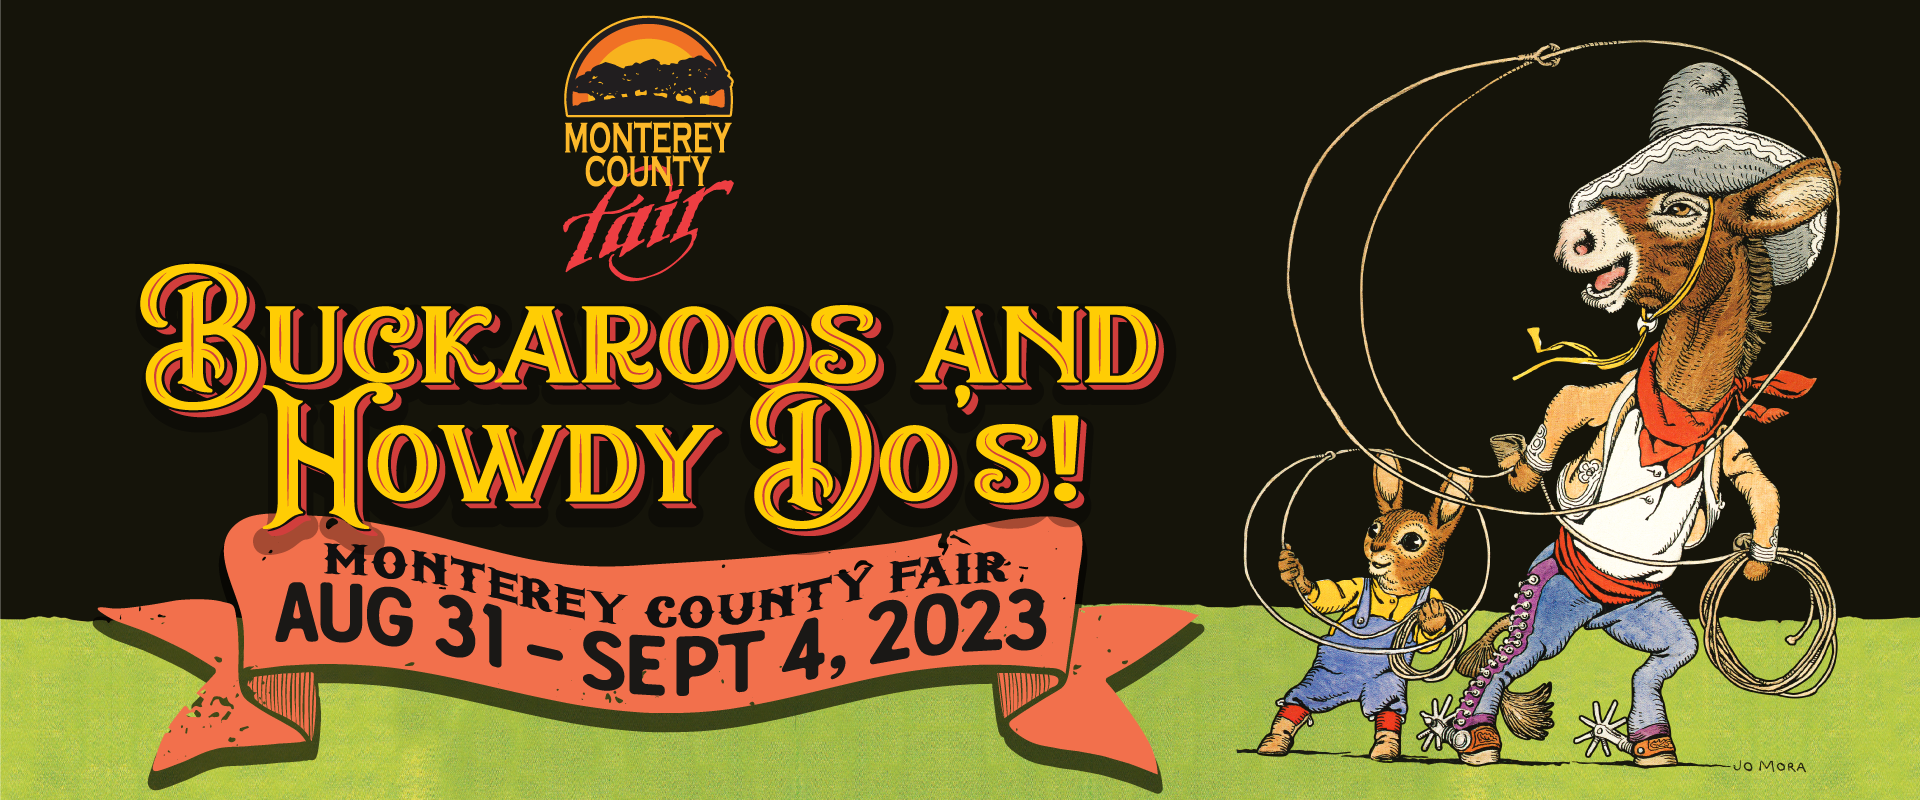 Buckaroos and Howdy Do's Monterey County Fair August 31 - September 4, 2023 With a horse and rabbit in chaps and overalls, the horse is wearing a cowboy hat standing on 2 legs they are both whipping a lasso